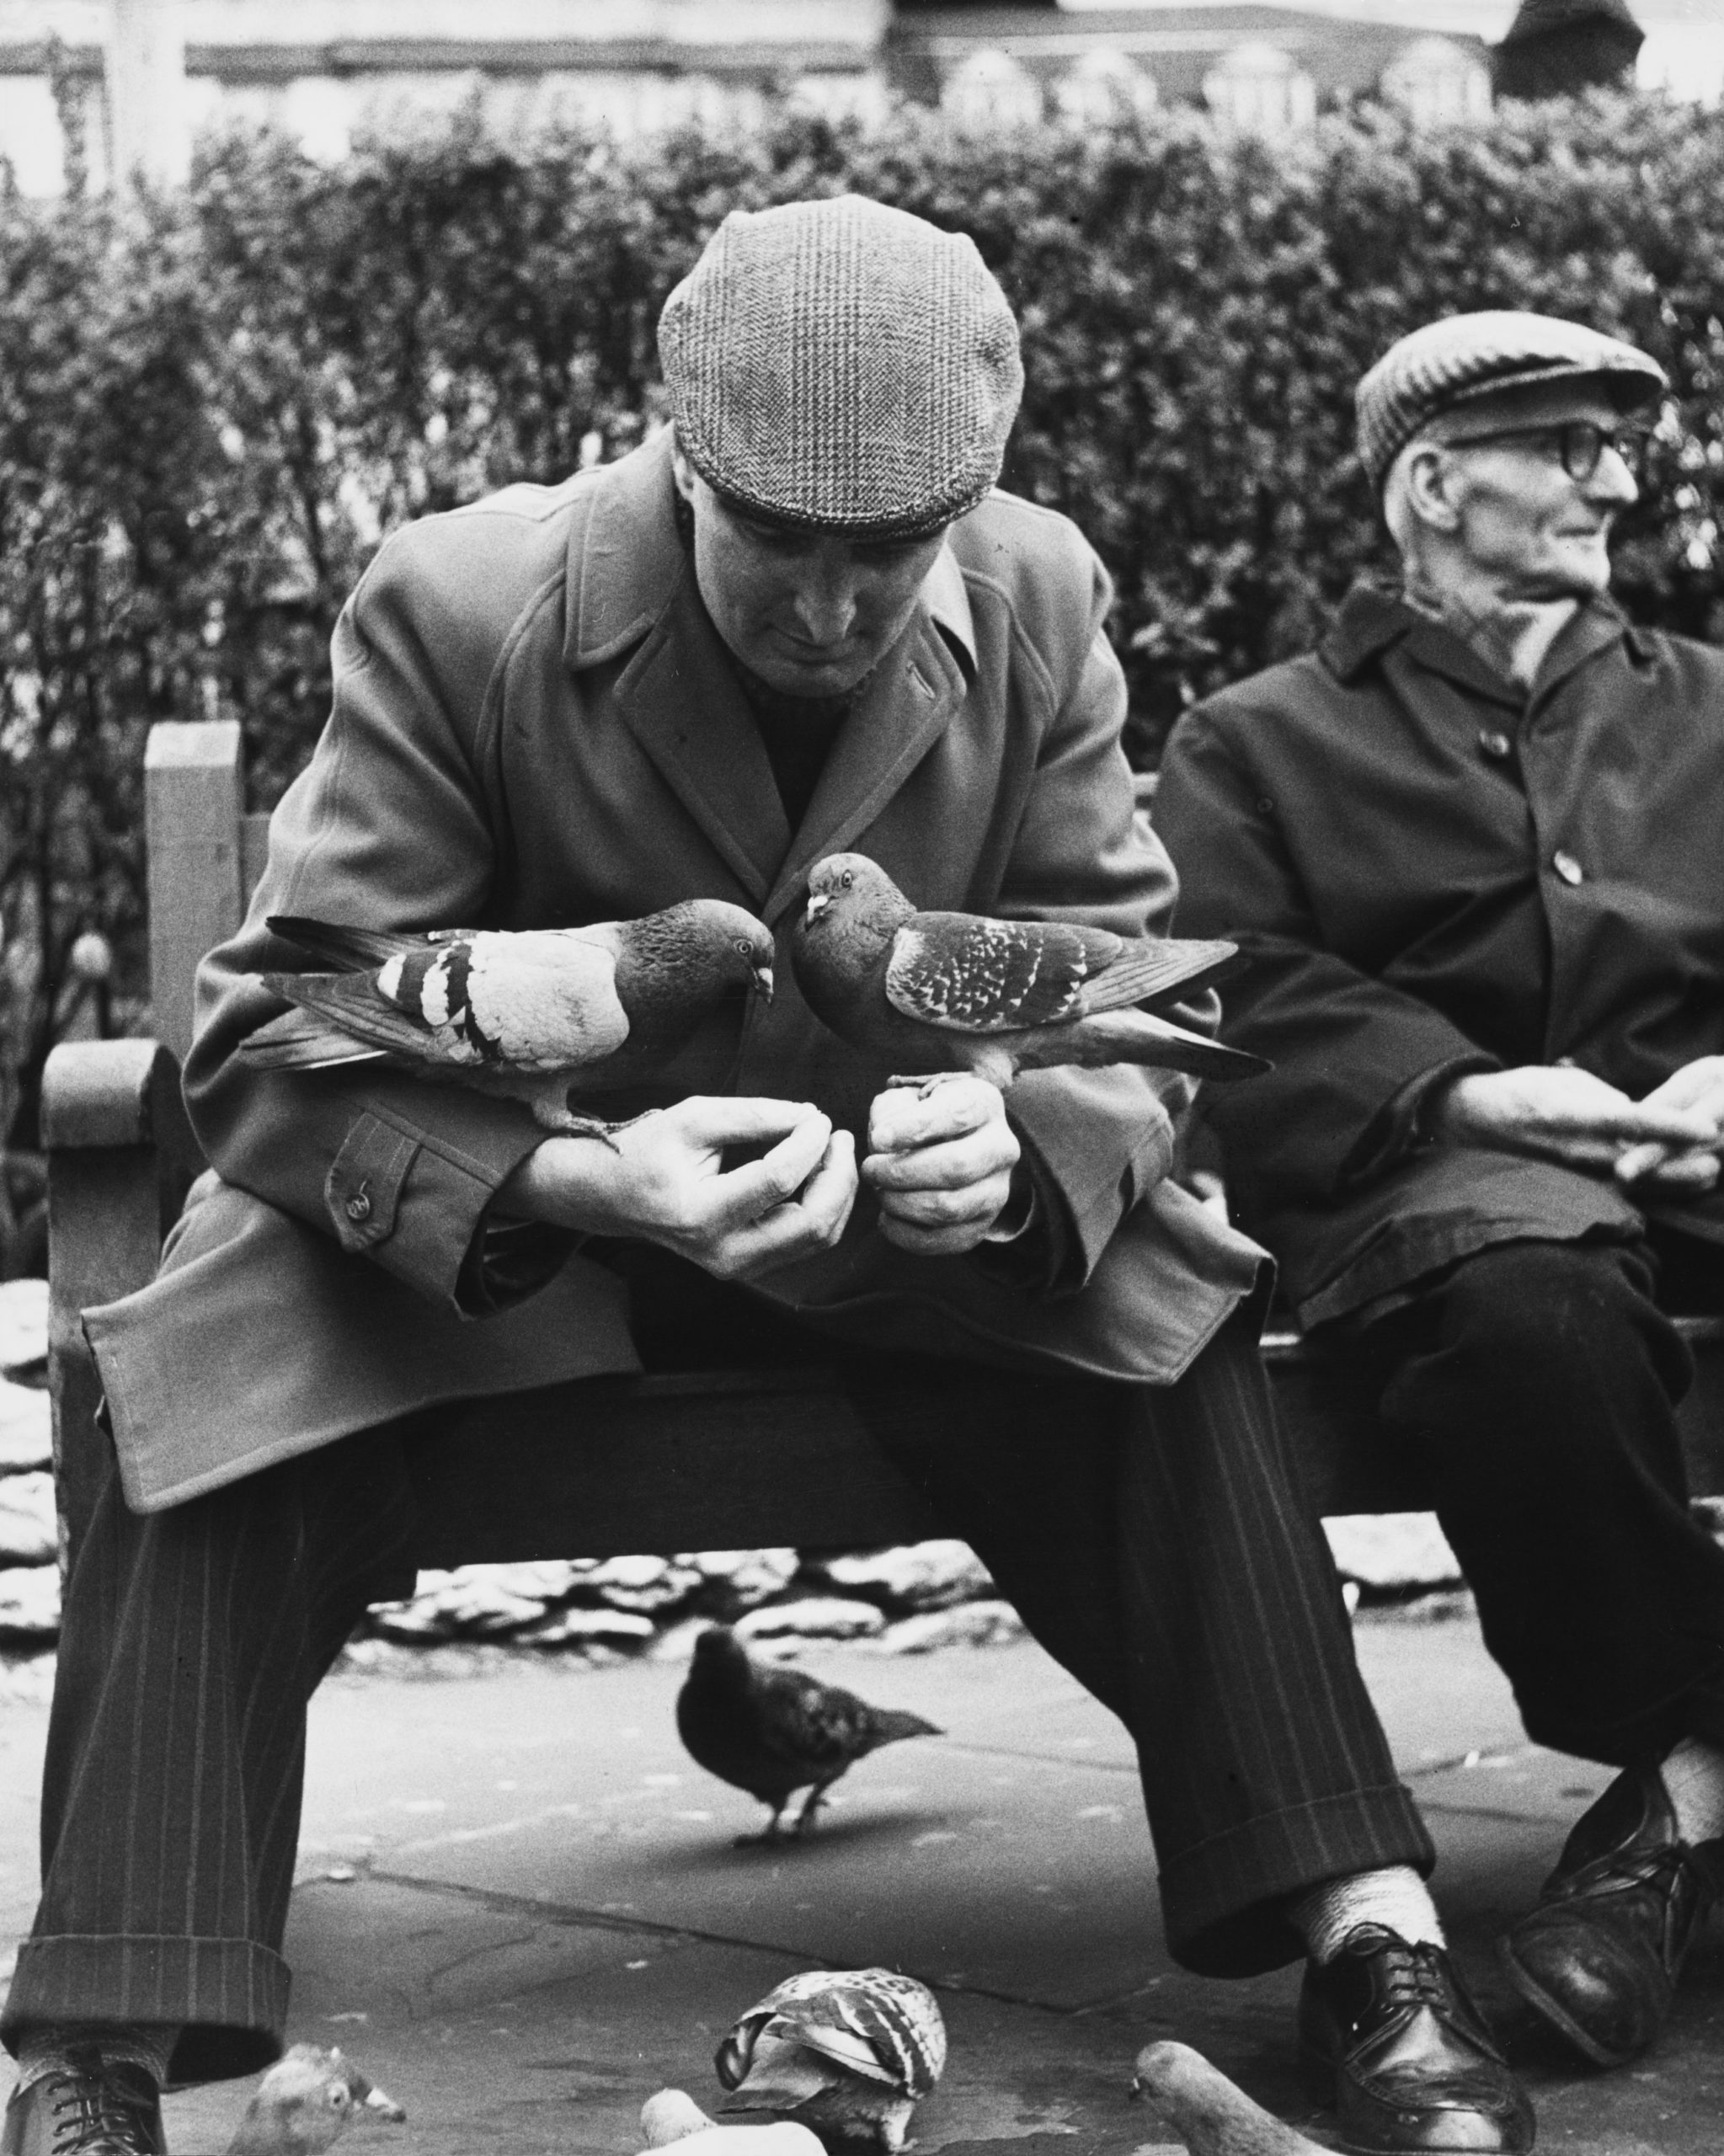 Shirley Baker, Manchester (Man with Pigeons), 1967